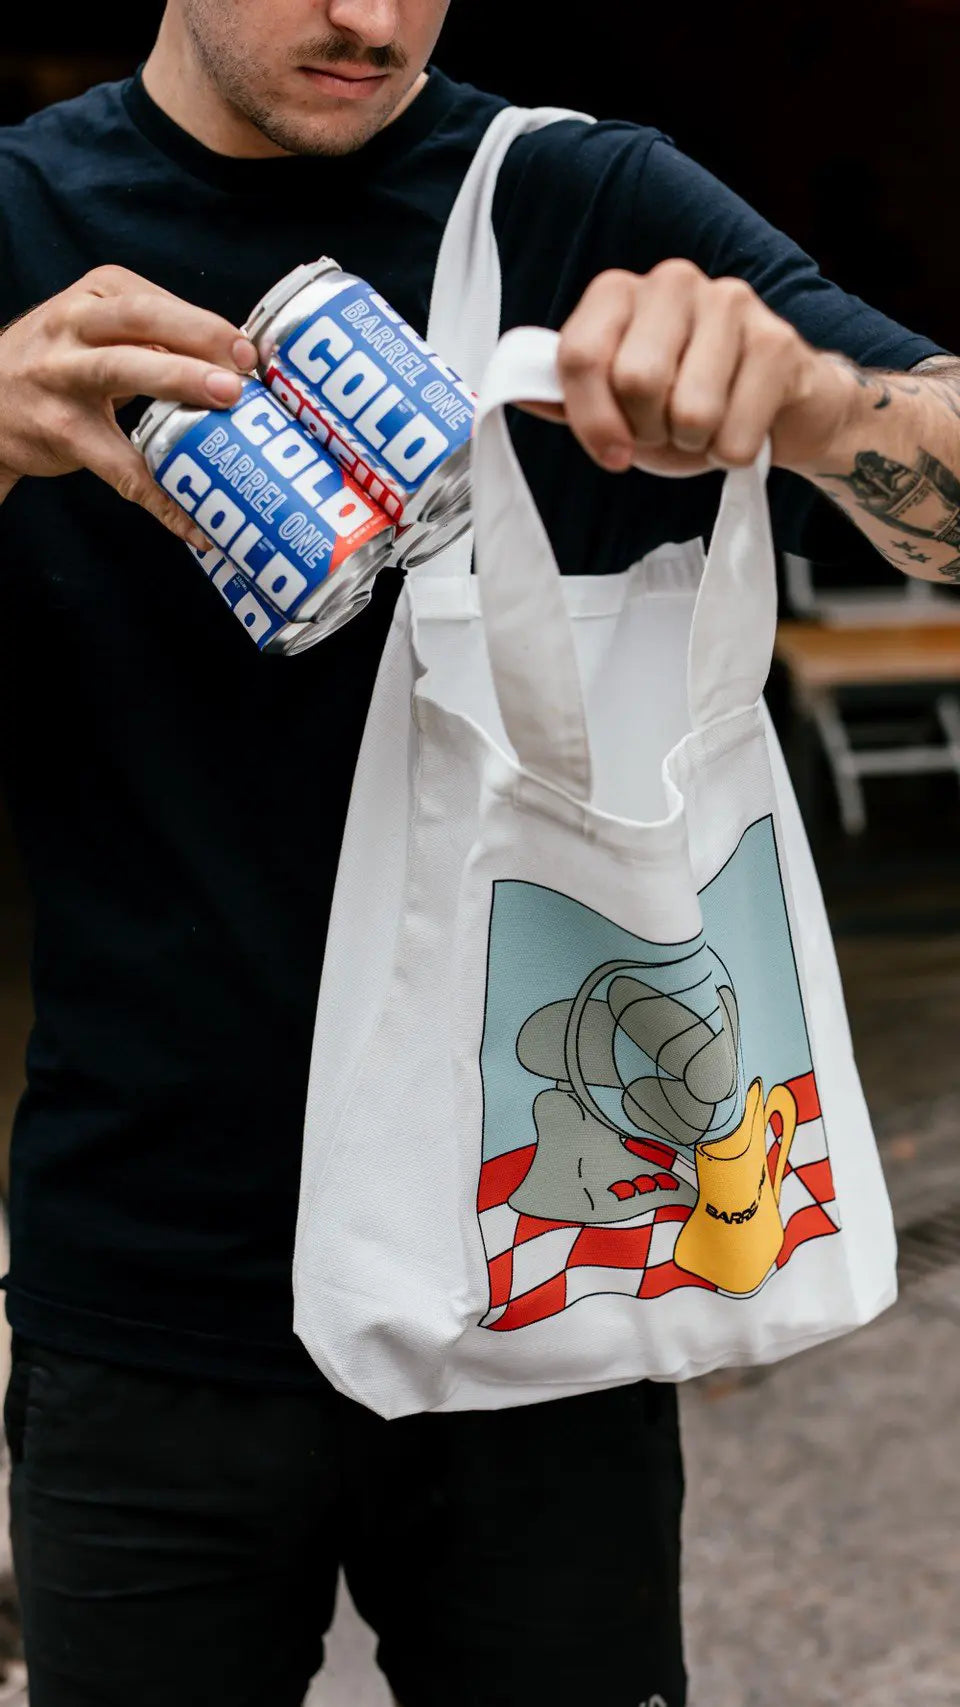 Barrel One’s stylish summer tote bag with a person using it to carry a 4 pack of cold brew coffee.